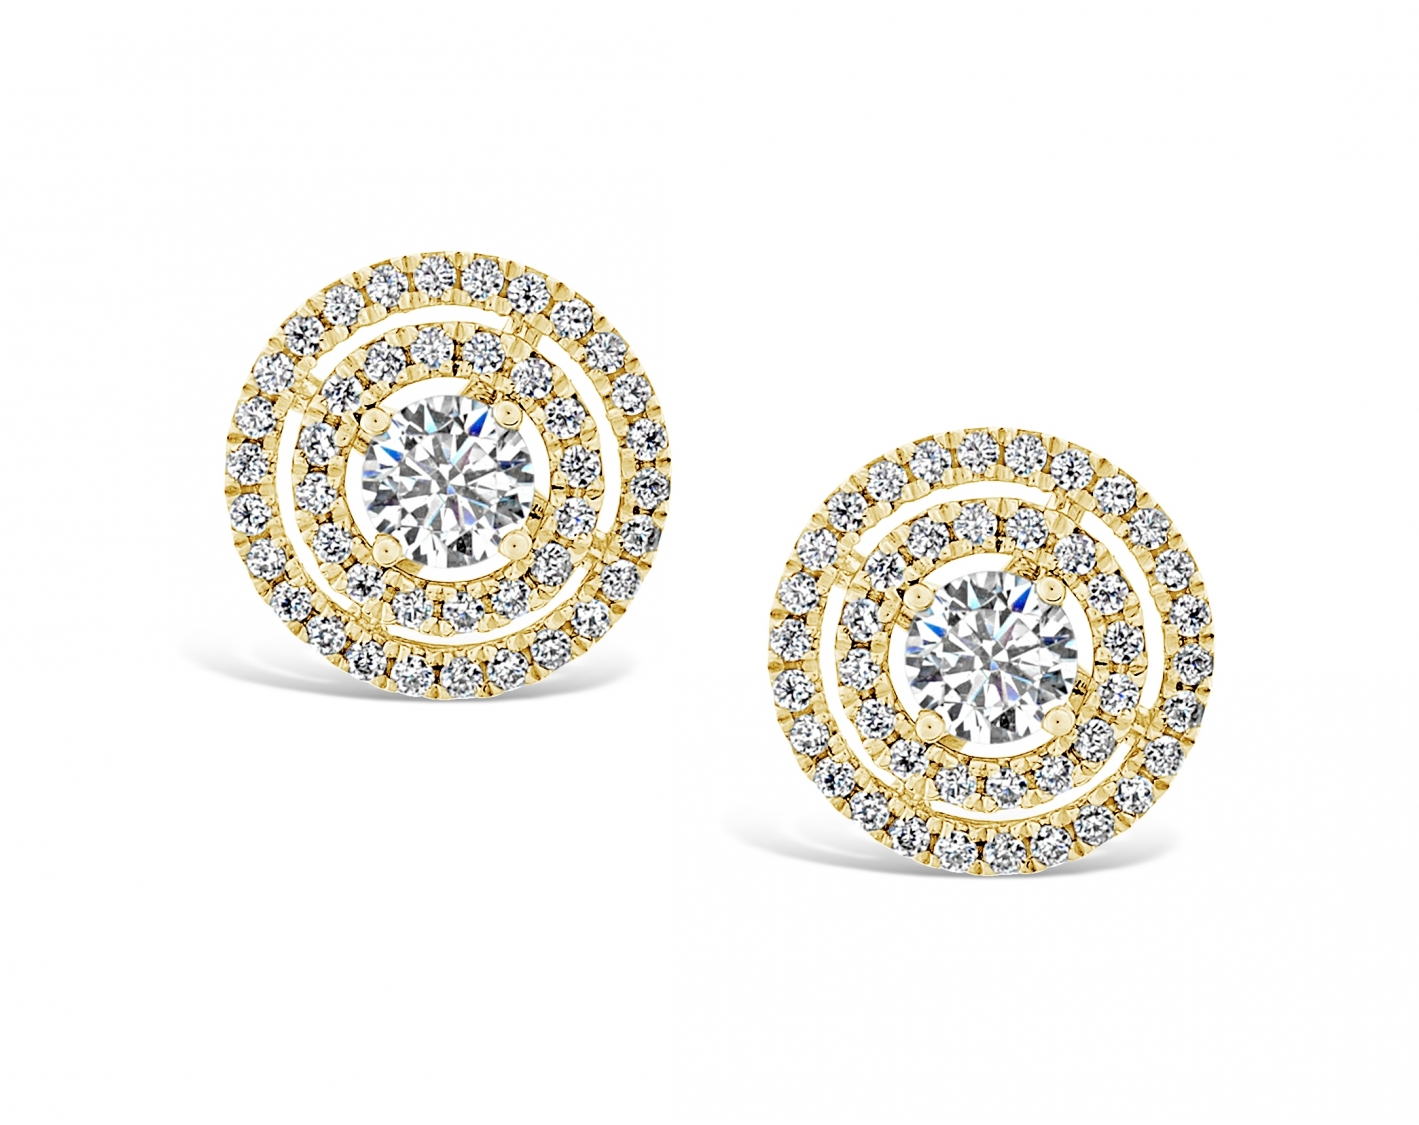 18k yellow gold double halo diamond earring studs Photos & images